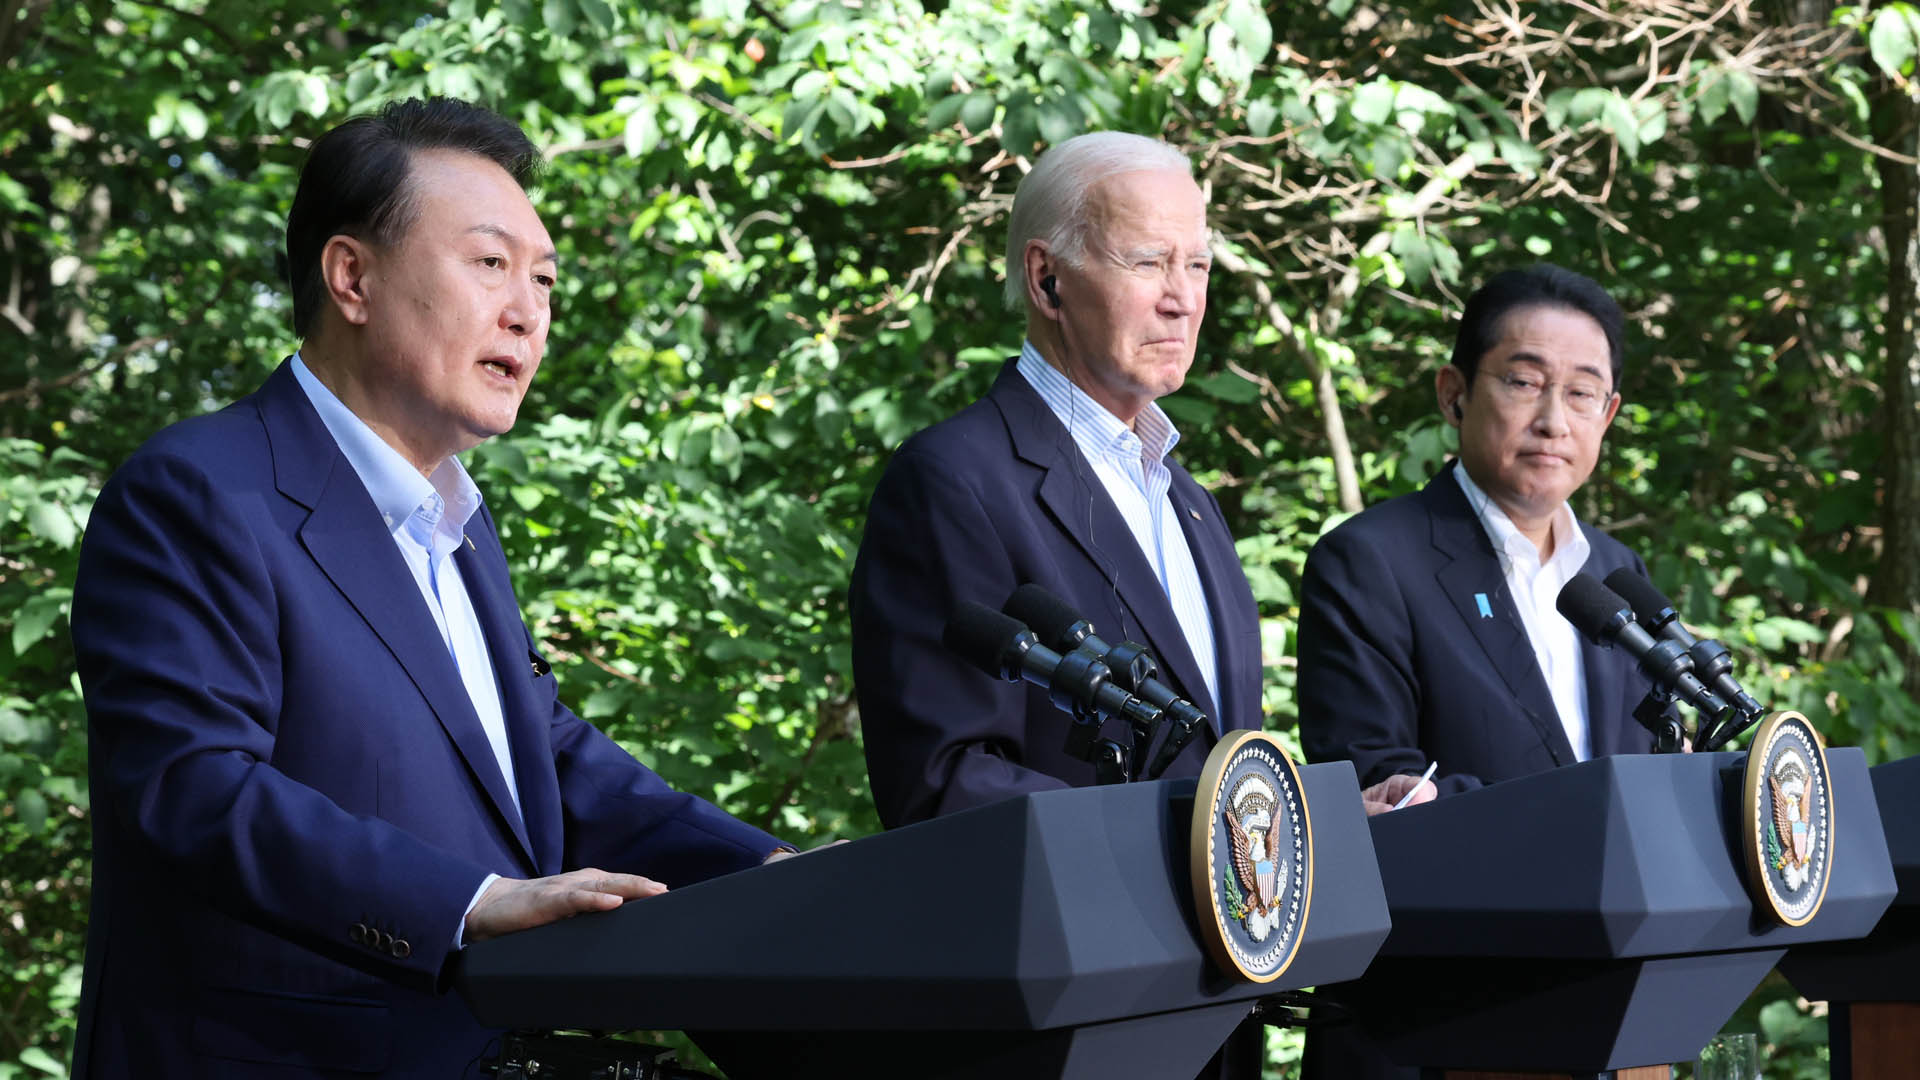 The Camp David Trilateral Summit Expands Trilateralism Beyond North Korea